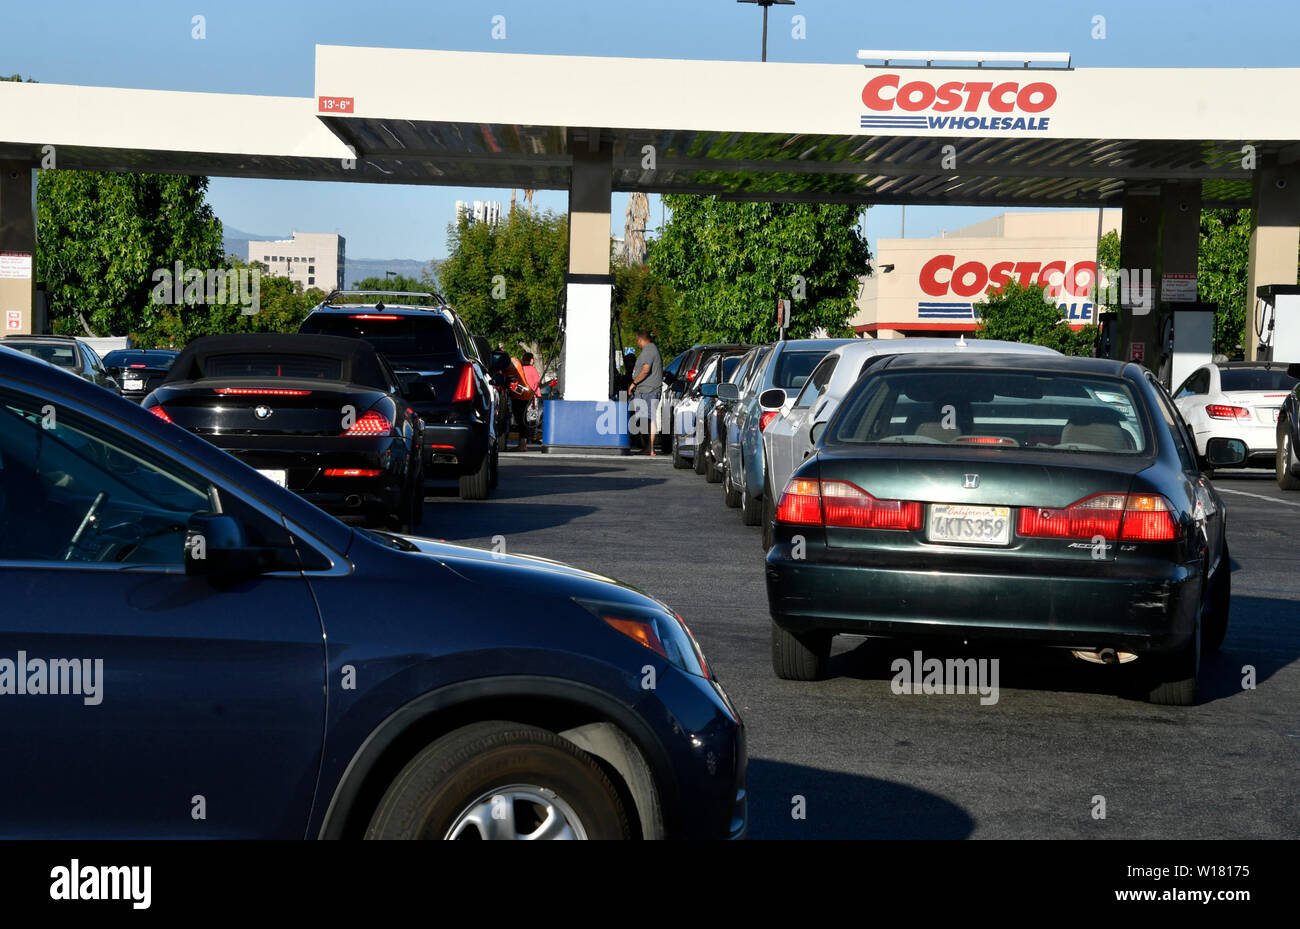 Hundreds of Socal drivers try to save money as they wait up to 45 min in line at a Costco gas station in Van Nuys, CA. Sunday late afternoon June 30, 2019. A new 6-cents-per-gallon gas tax takes effect statewide on July 1. That brings the total gas tax in California to 61.8 cents a gallon, the highest in the nation.The increase is part of SB 1, legislation that was signed into law in 2017.The measure is expected to bring in some $54 billion in state revenue over the next decade, funds that are supposed to pay for road and bridge repair.Photo by Gene Blevins/ZumaPress (Credit Image: © Gen Stock Photo